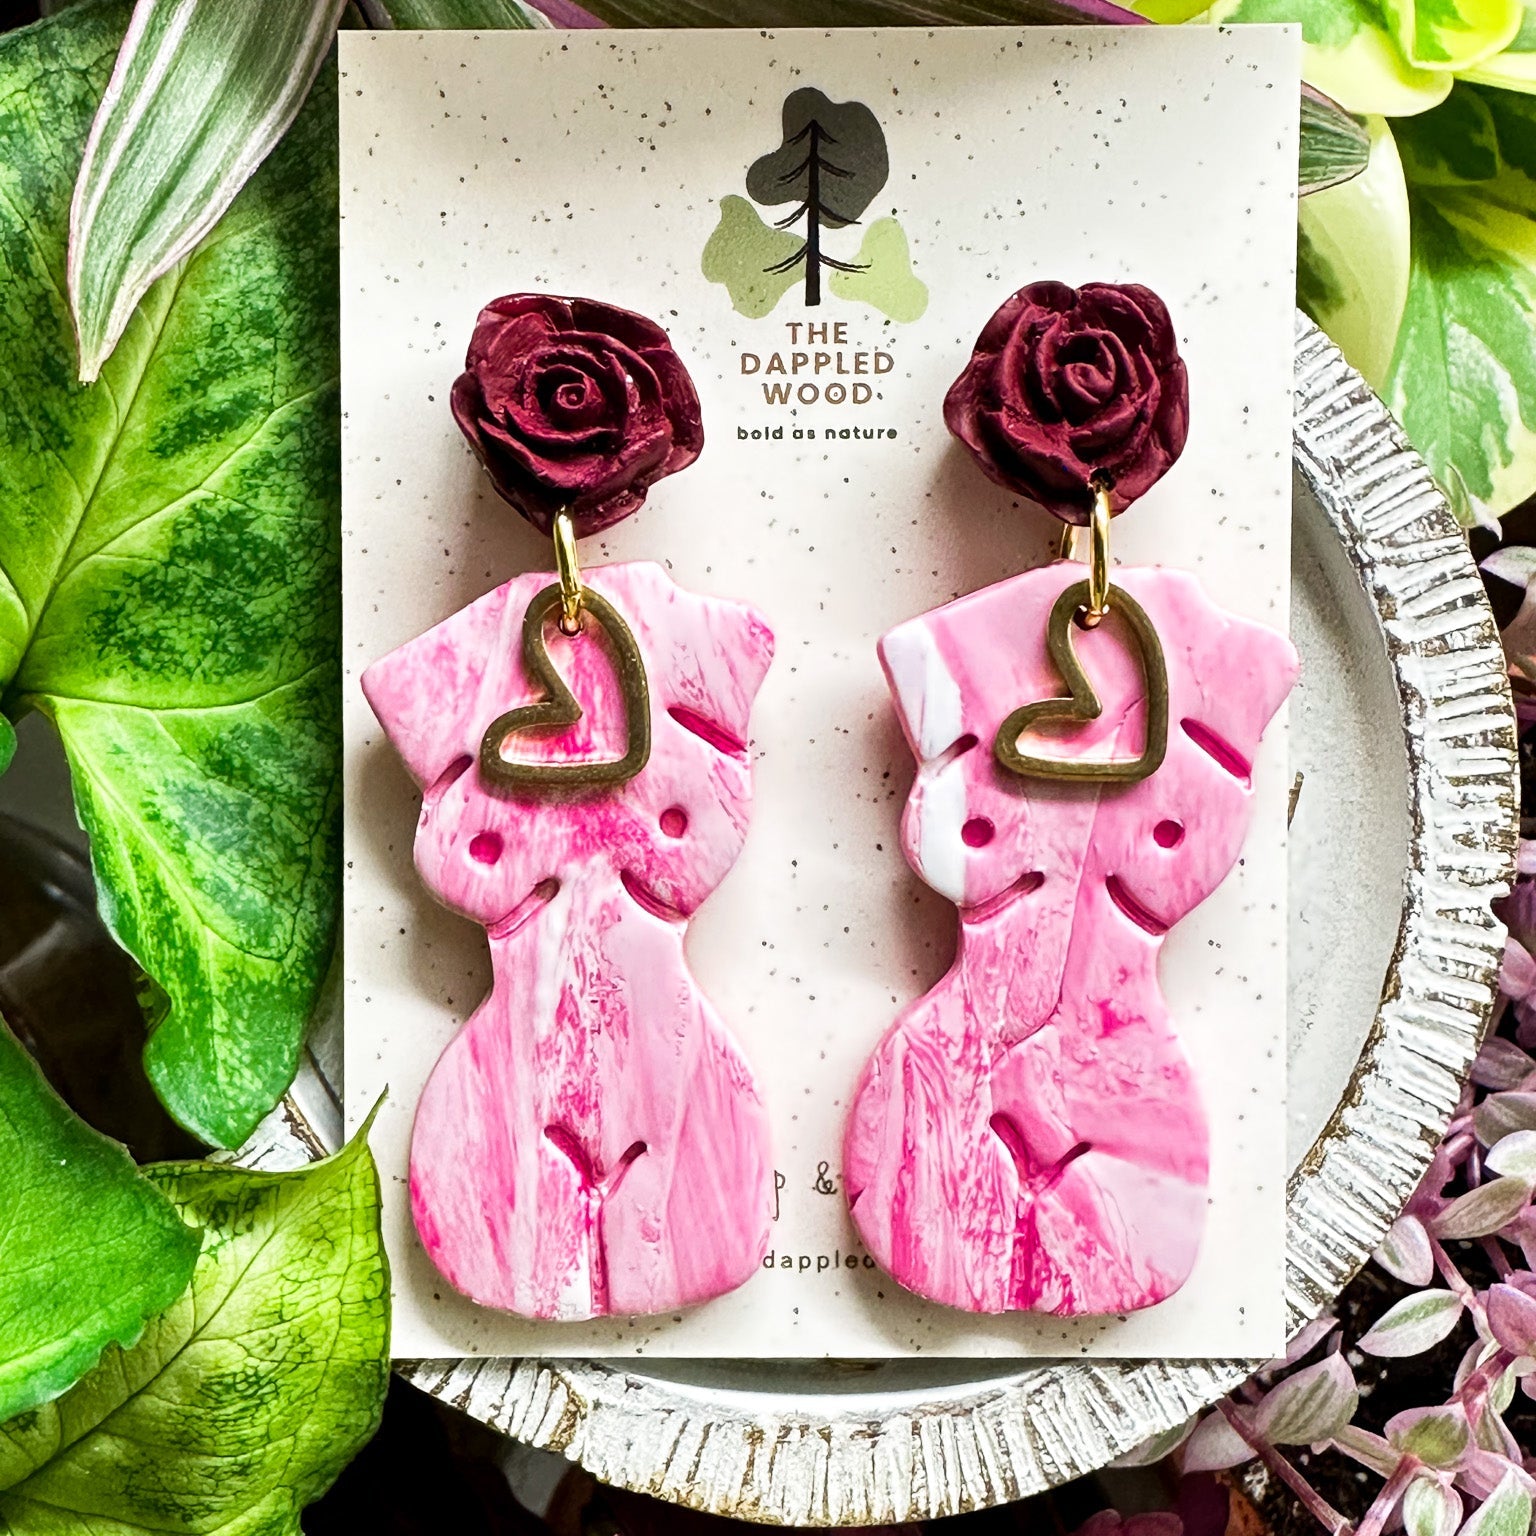 Marbled white and pink polymer clay earrings in the shape of a natural, curvy woman with a gold heart pendant, hanging from deep red rose posts. Earrings are showcased on a branded 'The Dappled Wood' card surrounded by lush greenery.